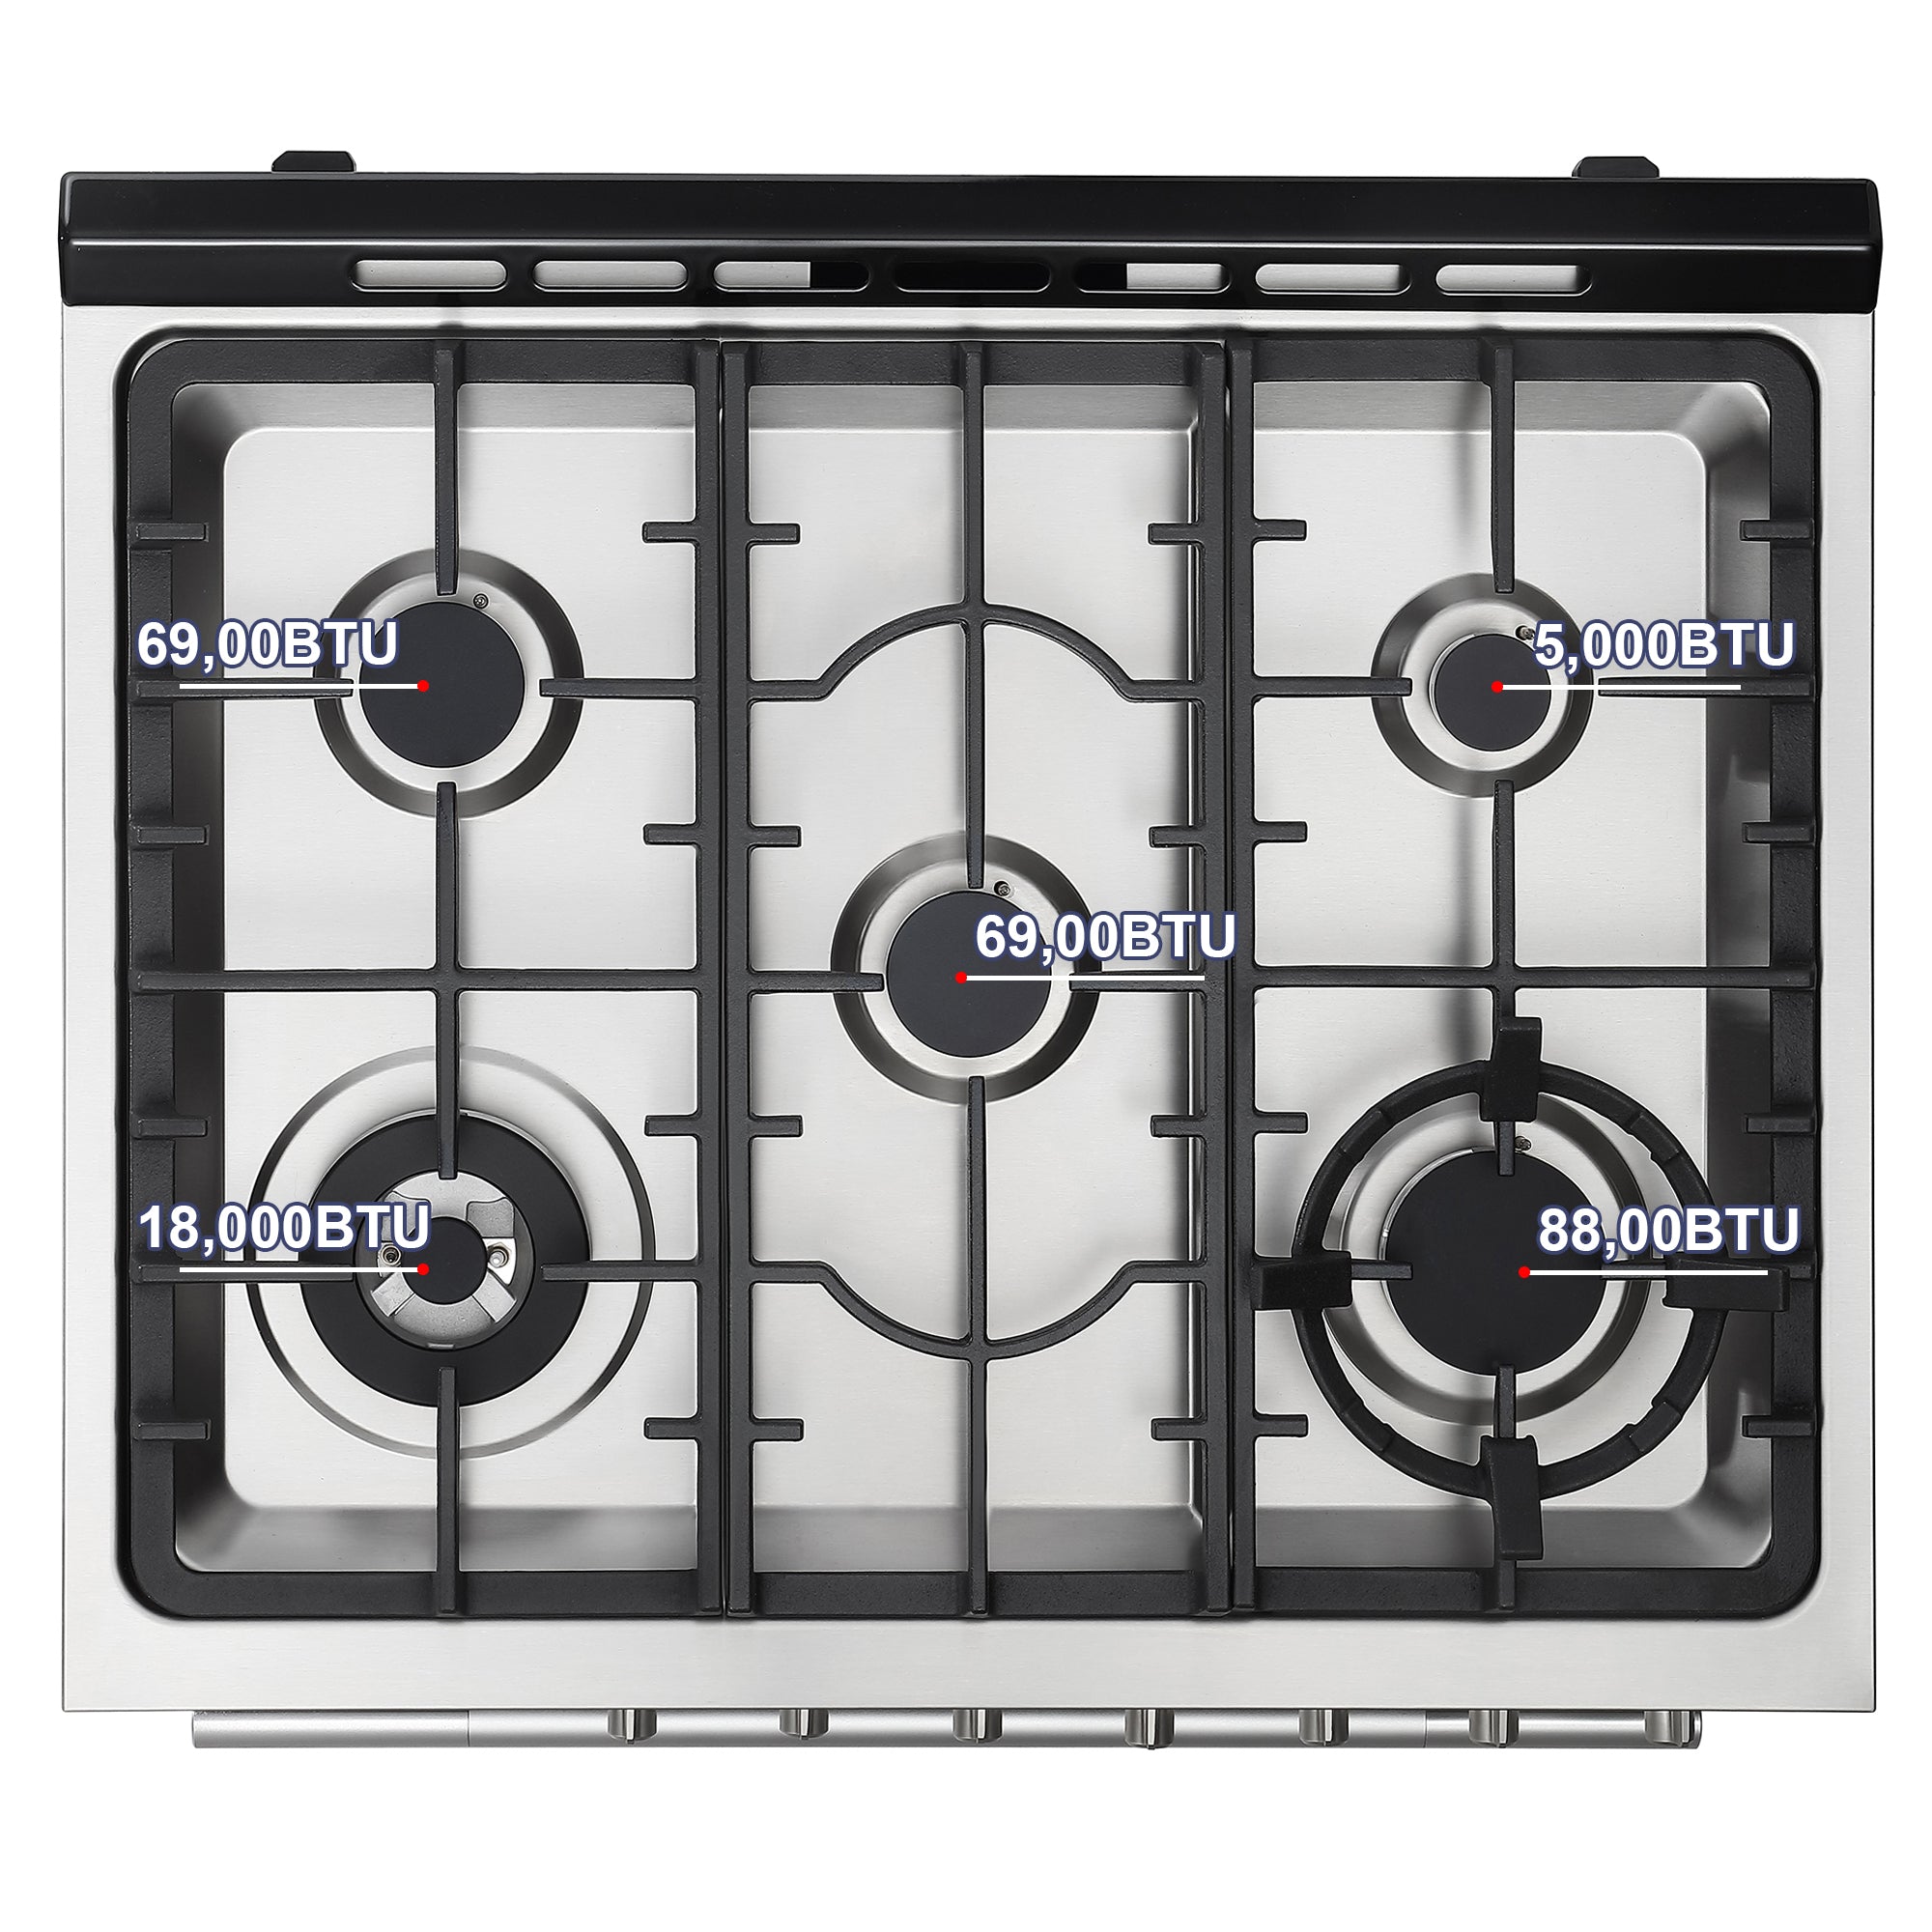 30 Inch Freestanding Range Gas Cooktop And Oven - EMPV-30GR06-7